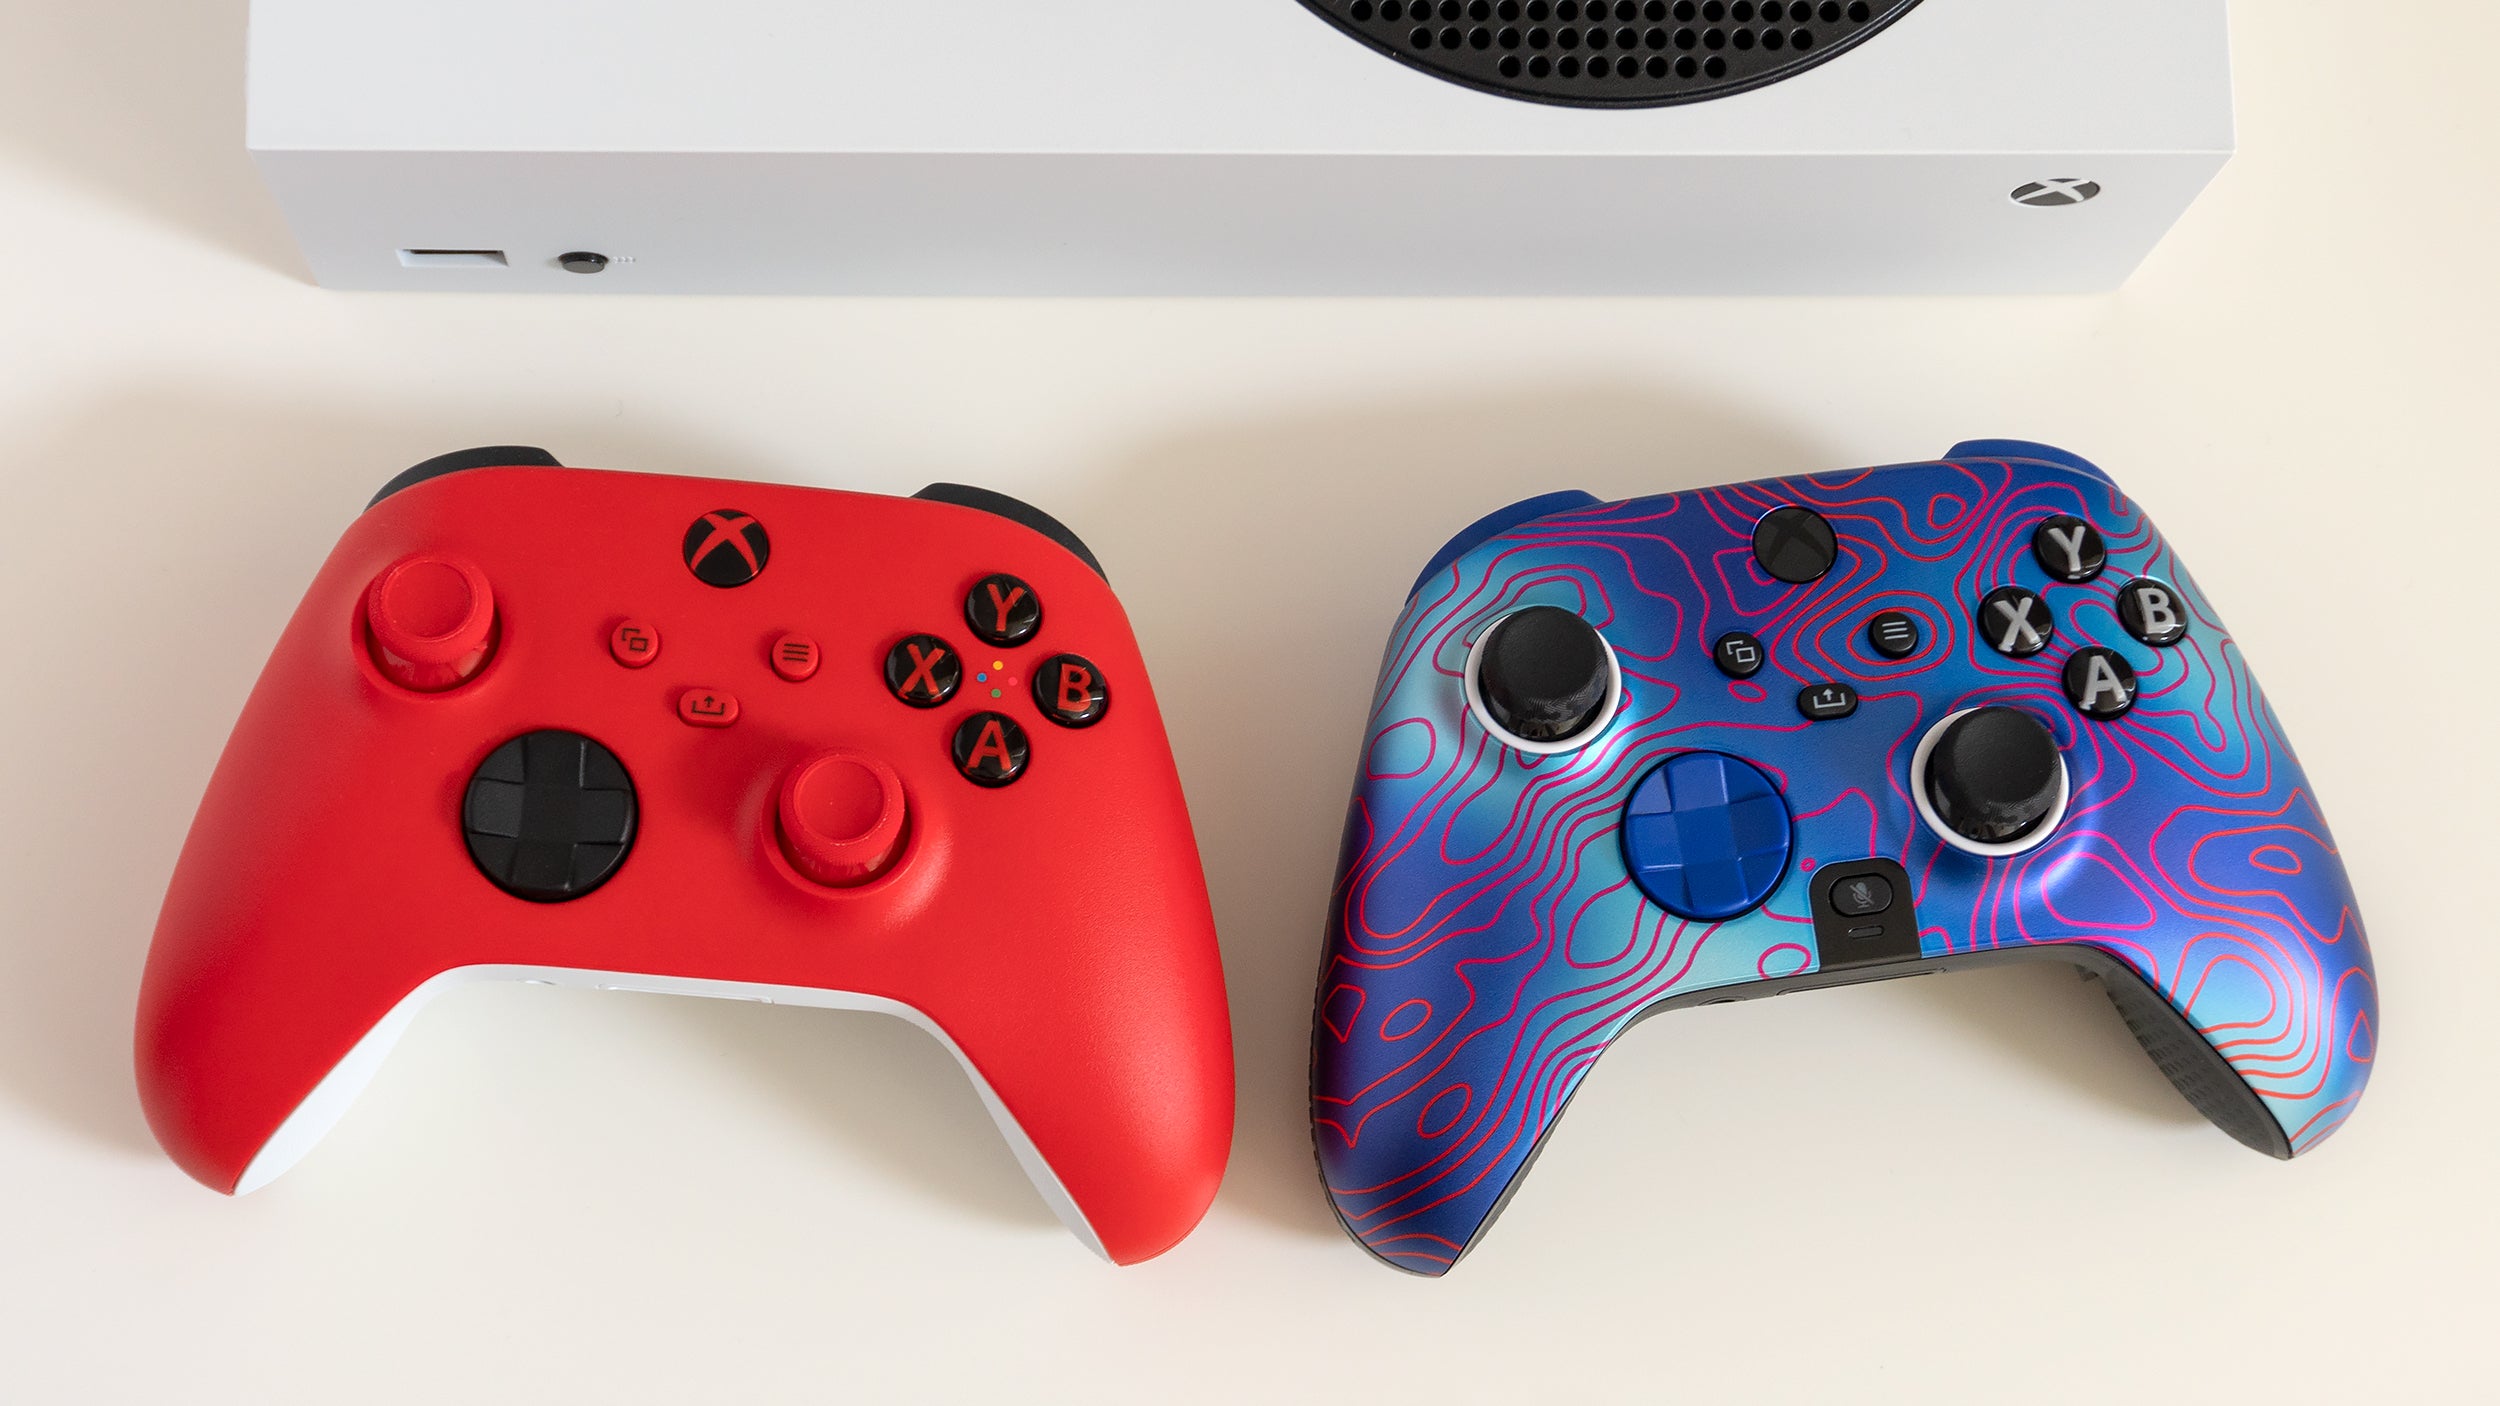 Compared to the OEM Microsoft Xbox Series X|S controller, Scuf hasn't completely reinvented the wheel, but made some very useful improvements. (Photo: Andrew Liszewski - Gizmodo)